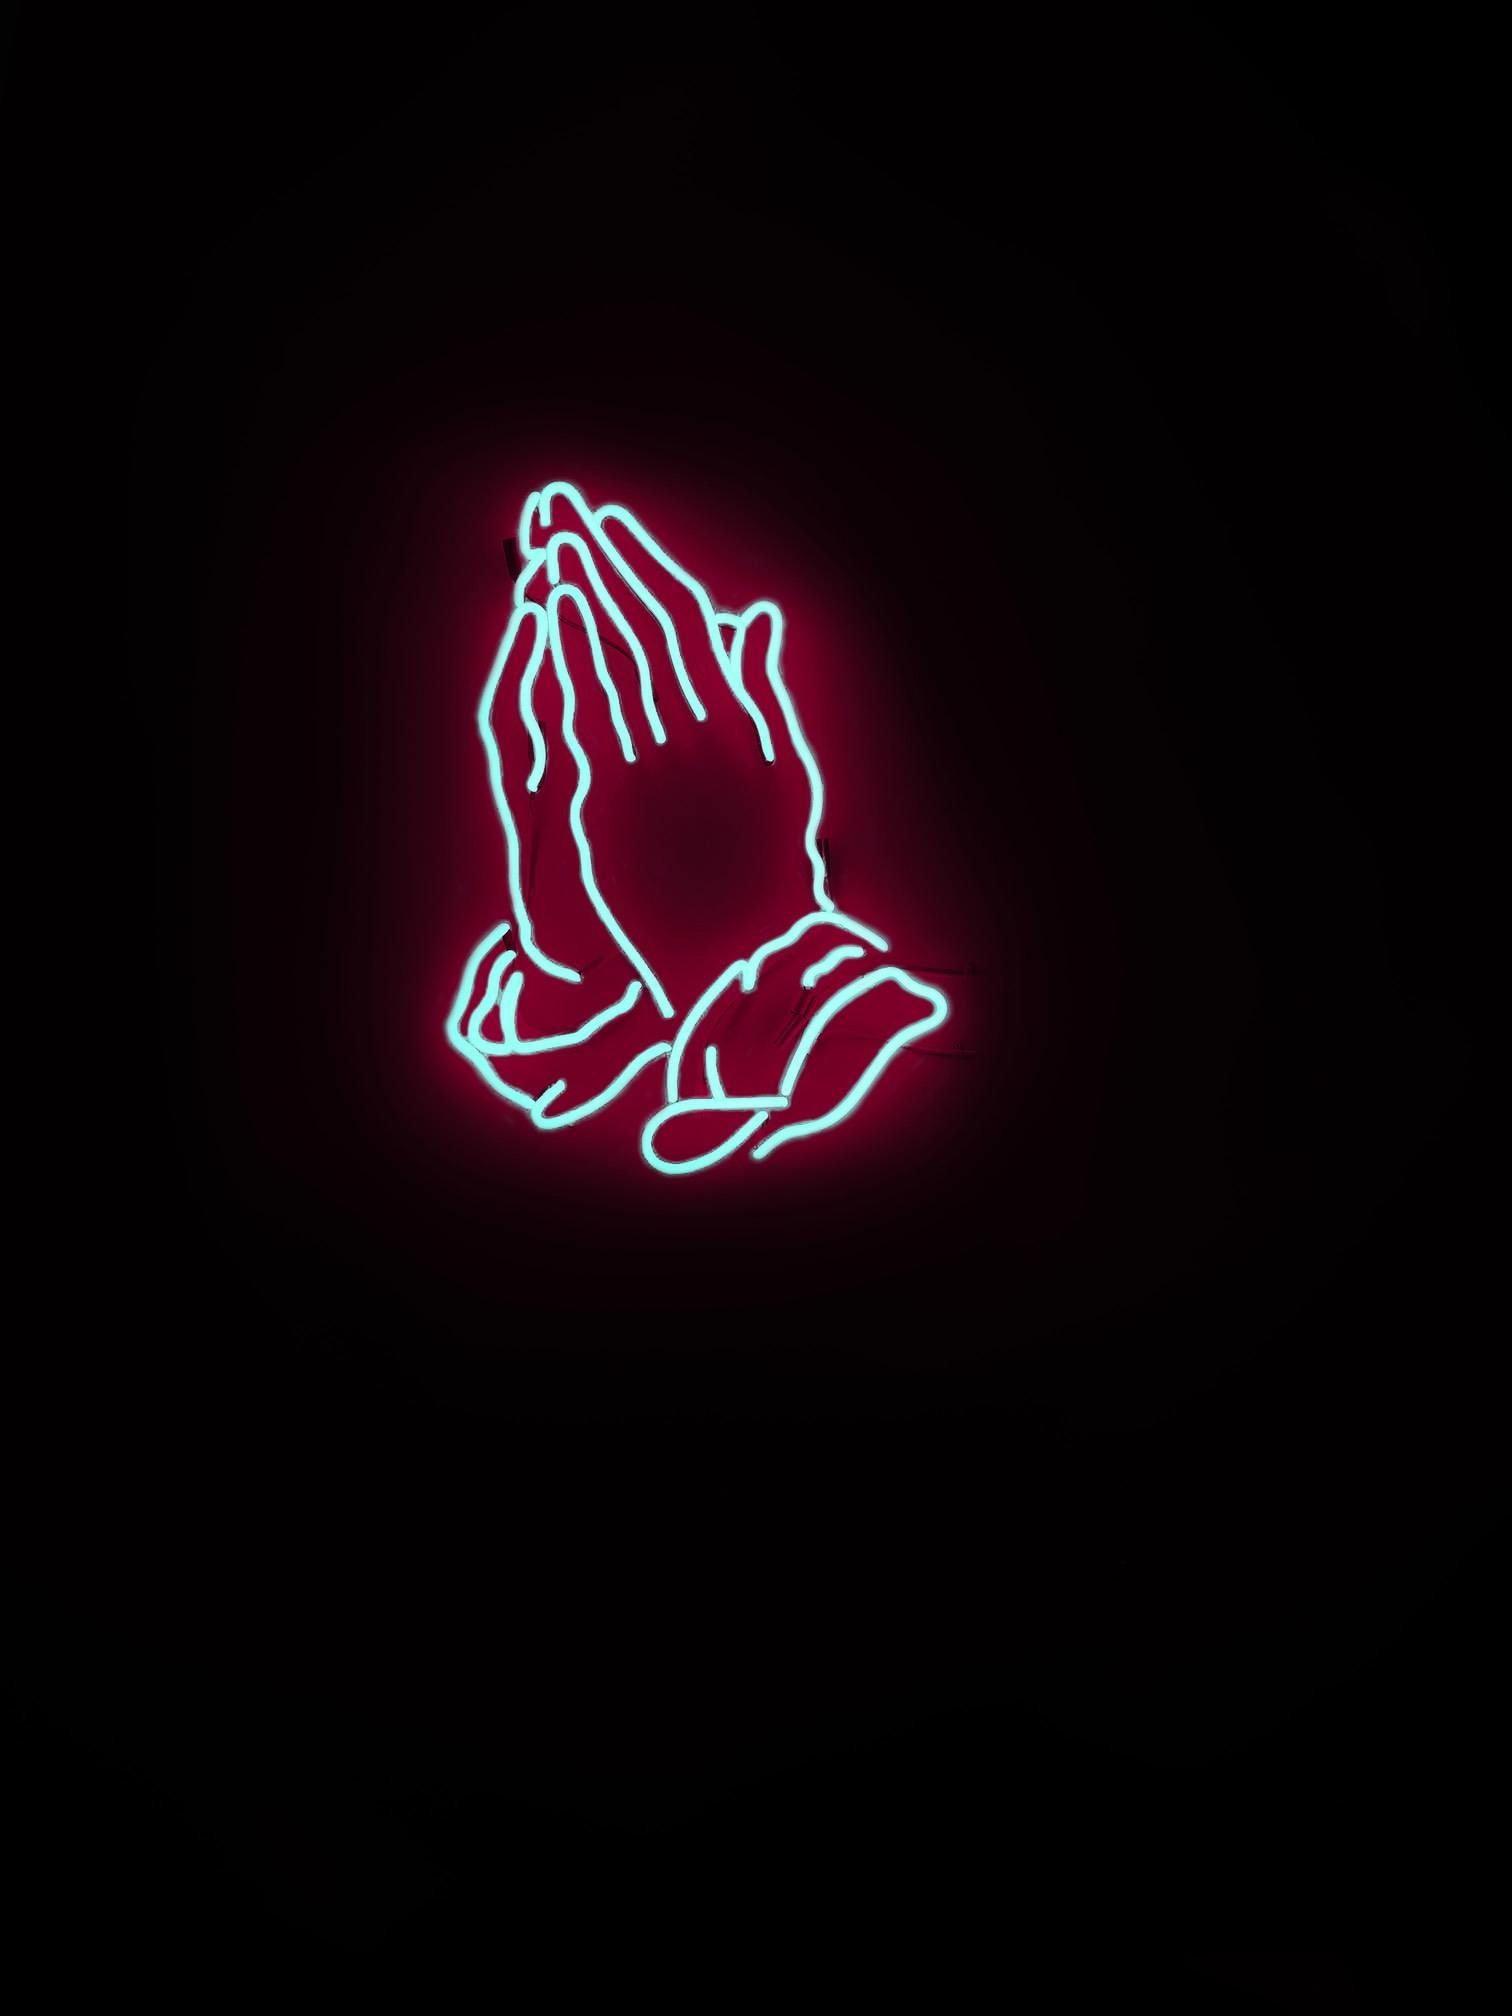 Free Trendy Neon Wallpaper For iPhone (HD Download!). Neon wallpaper, Prayer picture, Hand wallpaper